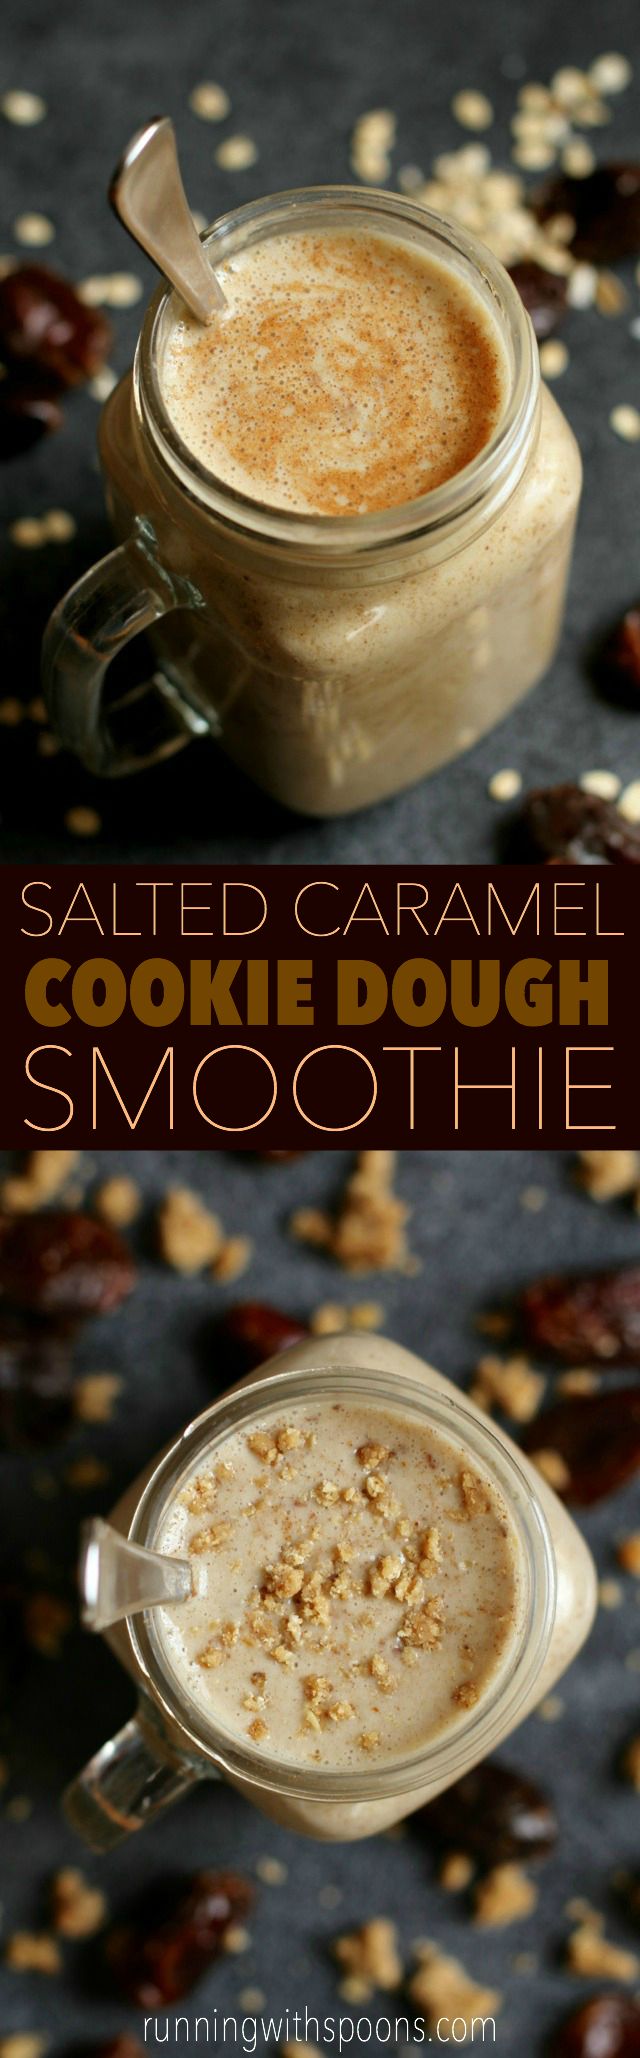 Salted Caramel Cookie Dough Smoothie -- cool, creamy, and ridiculously comforting. You'll never believe that it's actually healthy! || runningwithspoons.com #cookiedough #smoothie #vegan